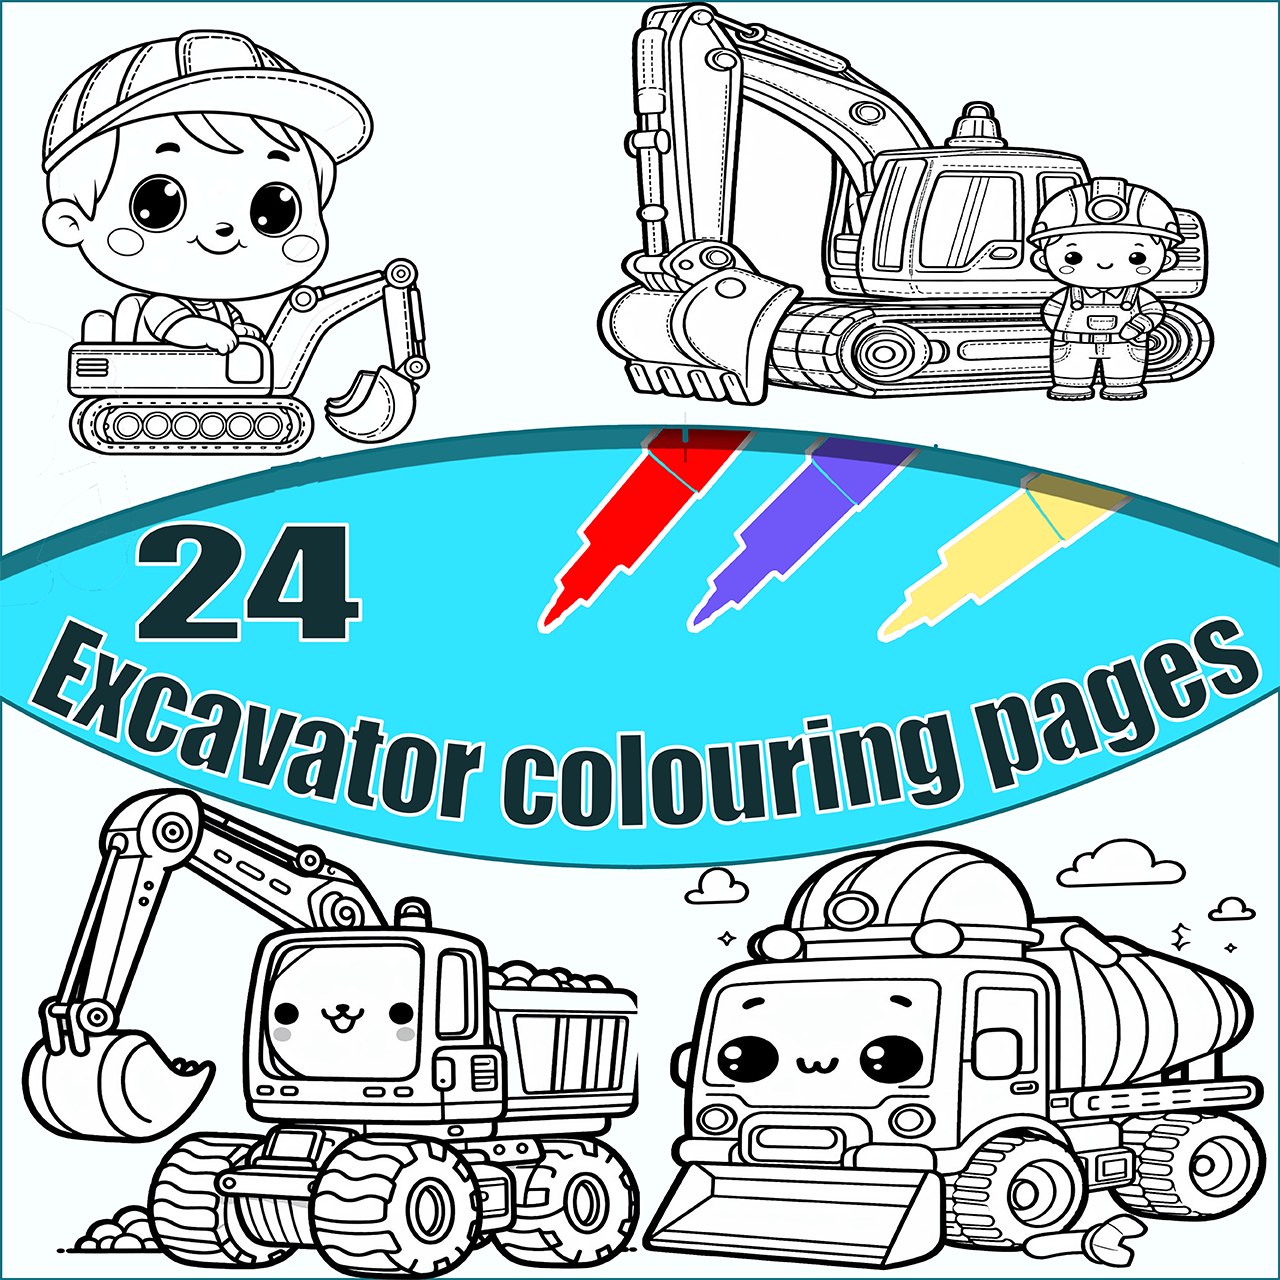 Printable Excavator Coloring Pages; Educational Construction Digger Coloring Sheet; Construction Digger Coloring Printable; Excavator Coloring Sheet for Kids; Educational Coloring Page with Construction Theme; Printable Digger Coloring Activity ; Coloring Page Featuring Construction Machinery; Excavator Coloring Picture for Children; Educational Coloring Sheet with Digger Illustration;